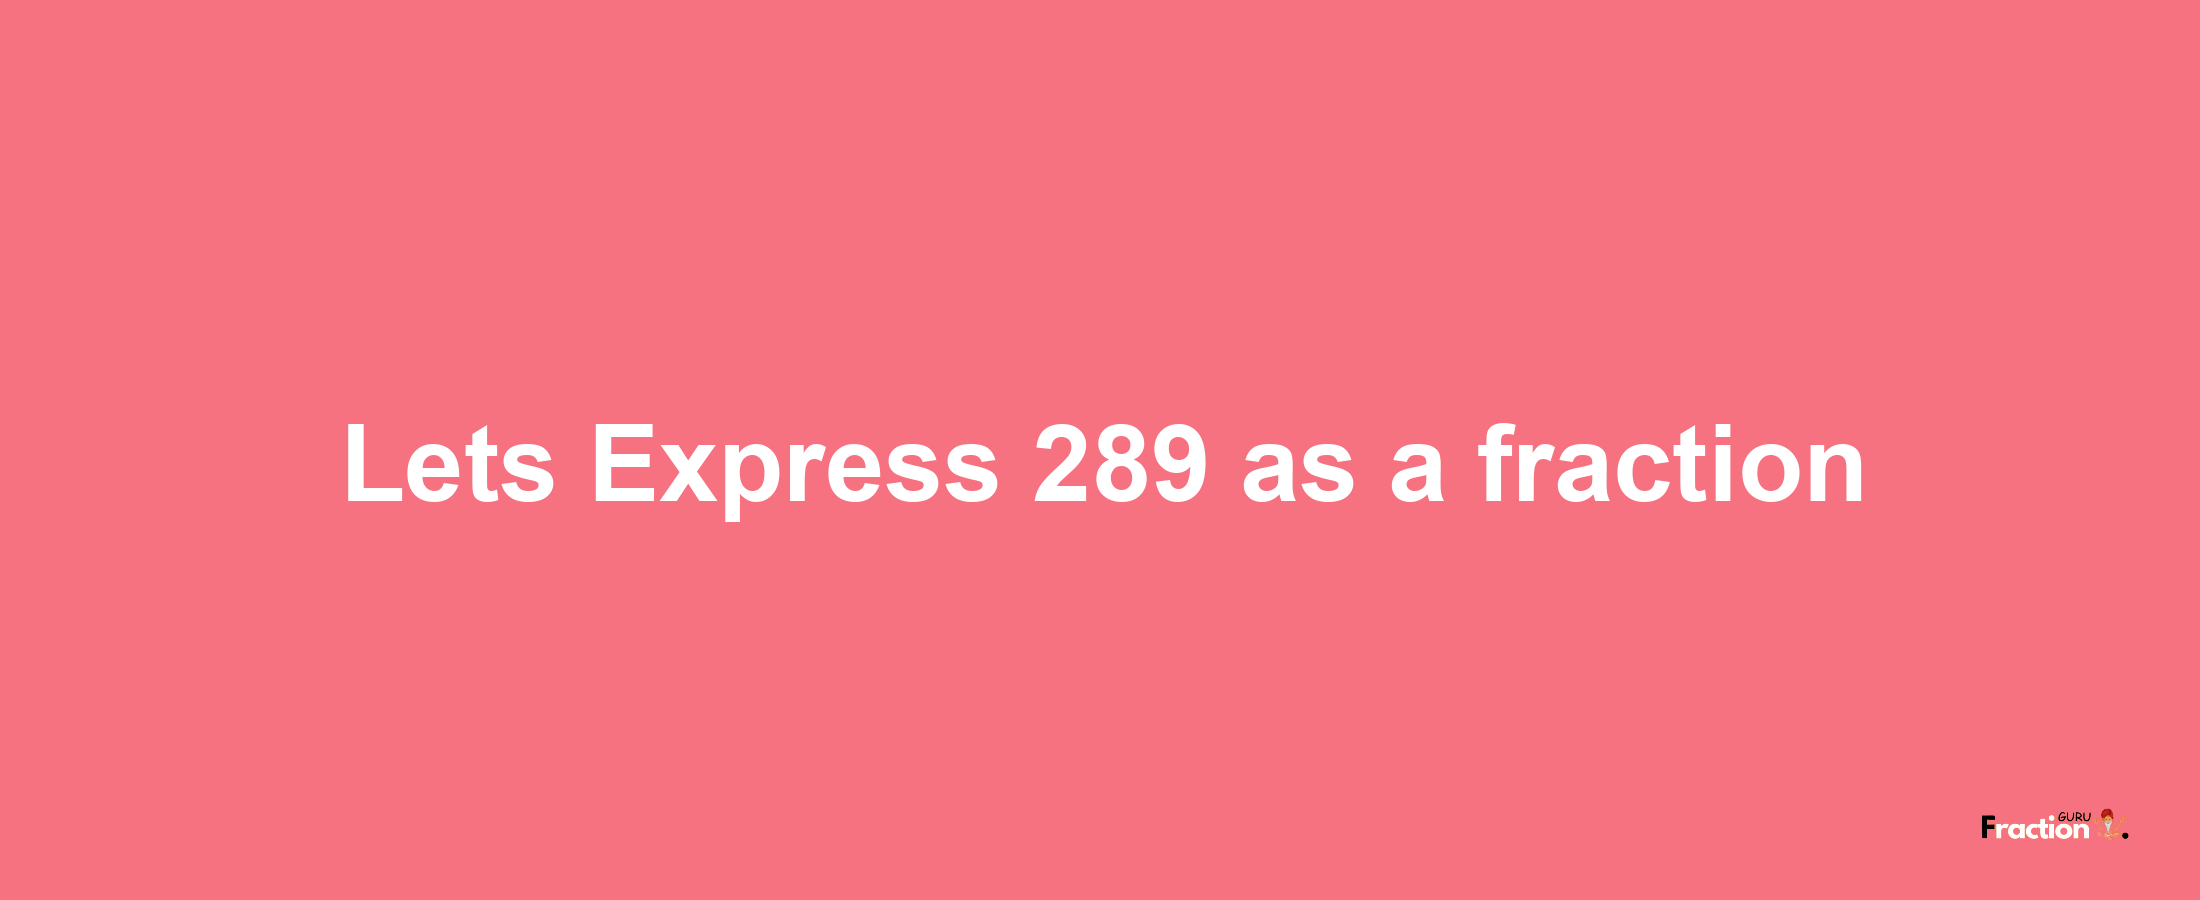 Lets Express 289 as afraction